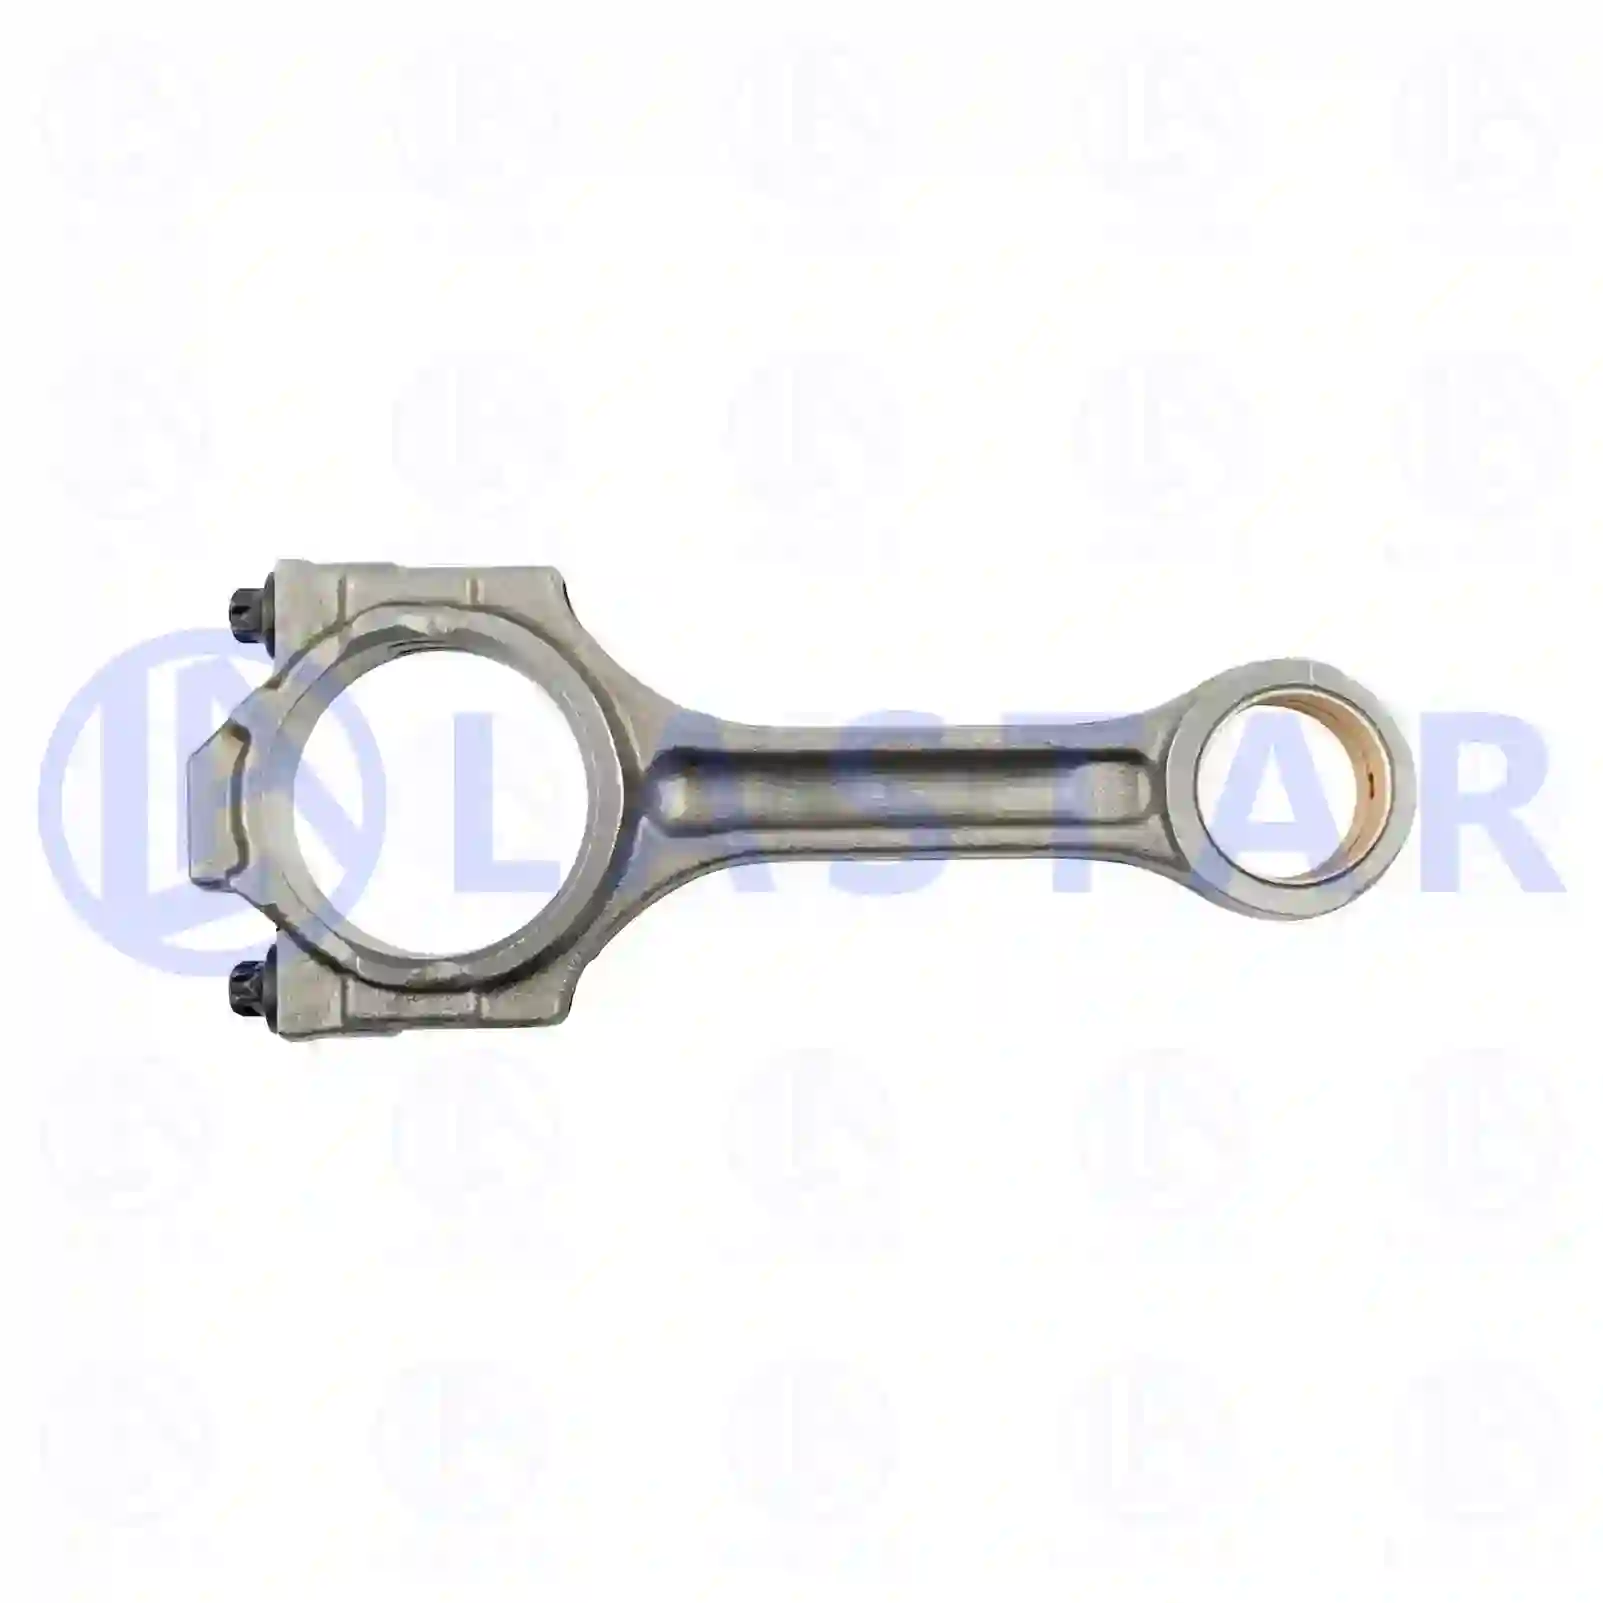 Connecting rod, straight head, 77704407, 51024006015, 51024010206, 51024016209, 51024016221, 51024016250, 51024016267, 51024016277 ||  77704407 Lastar Spare Part | Truck Spare Parts, Auotomotive Spare Parts Connecting rod, straight head, 77704407, 51024006015, 51024010206, 51024016209, 51024016221, 51024016250, 51024016267, 51024016277 ||  77704407 Lastar Spare Part | Truck Spare Parts, Auotomotive Spare Parts